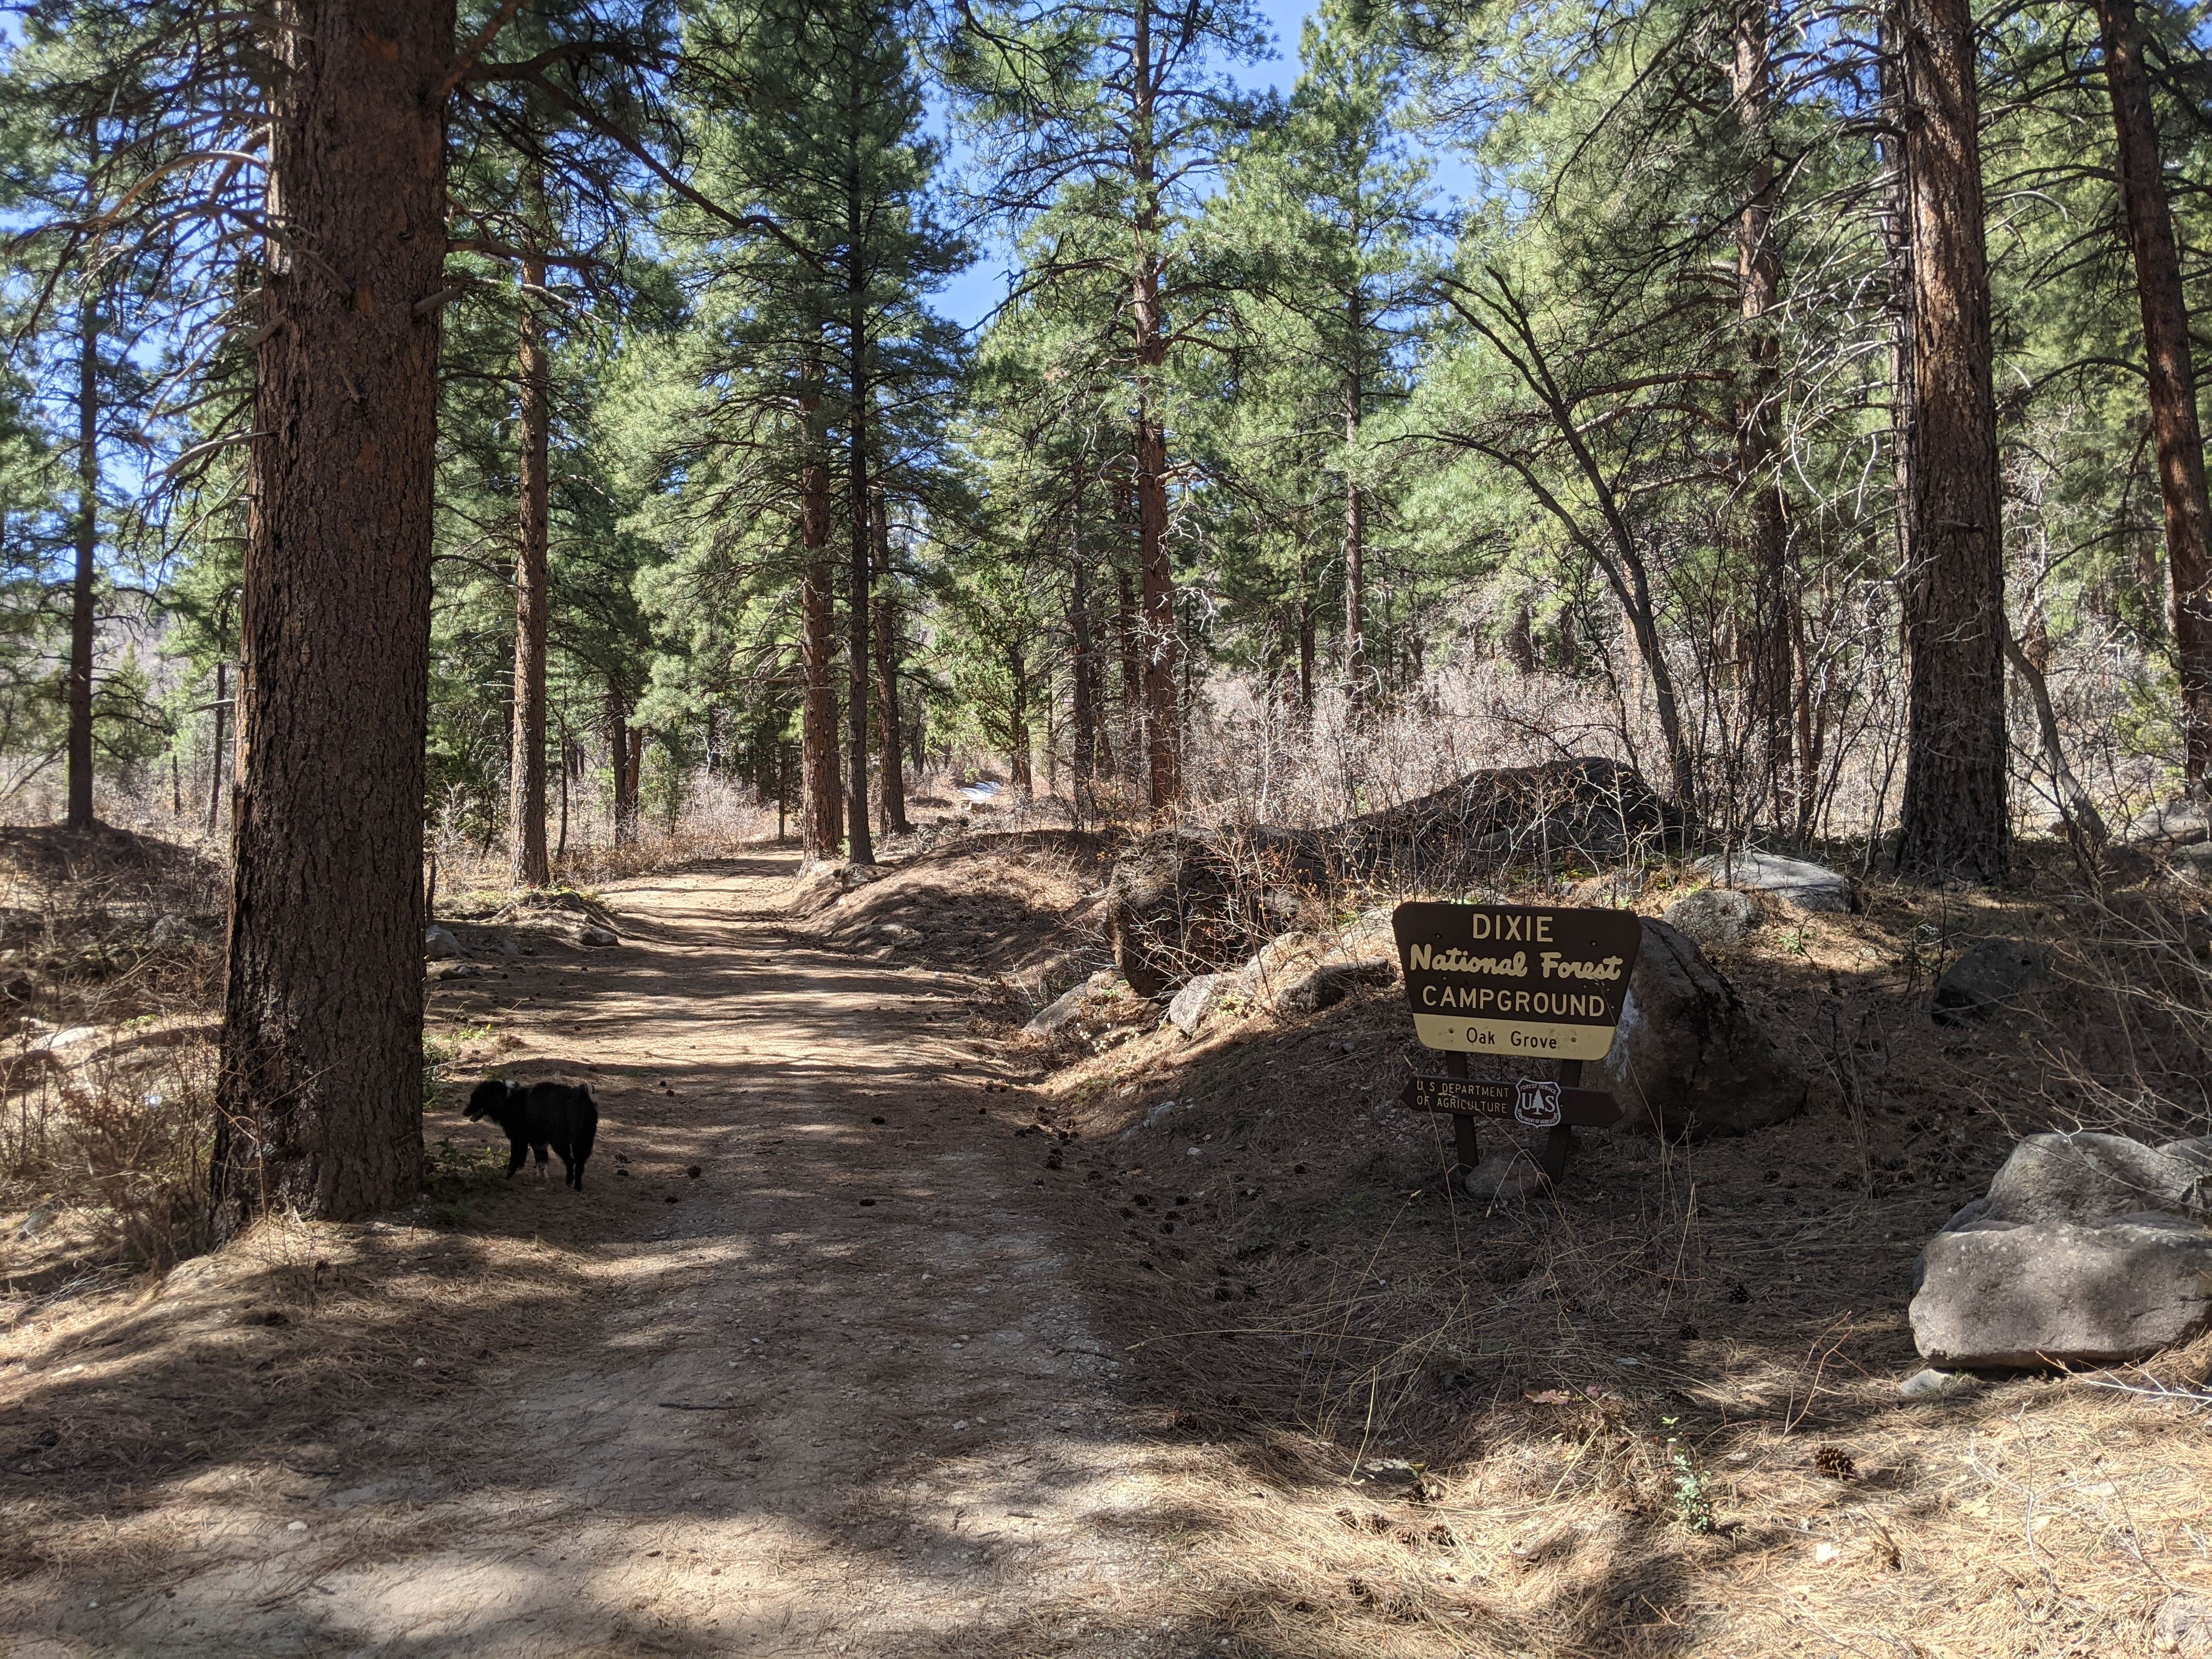 Camper submitted image from Oak Grove Campground Dixie NF - 1